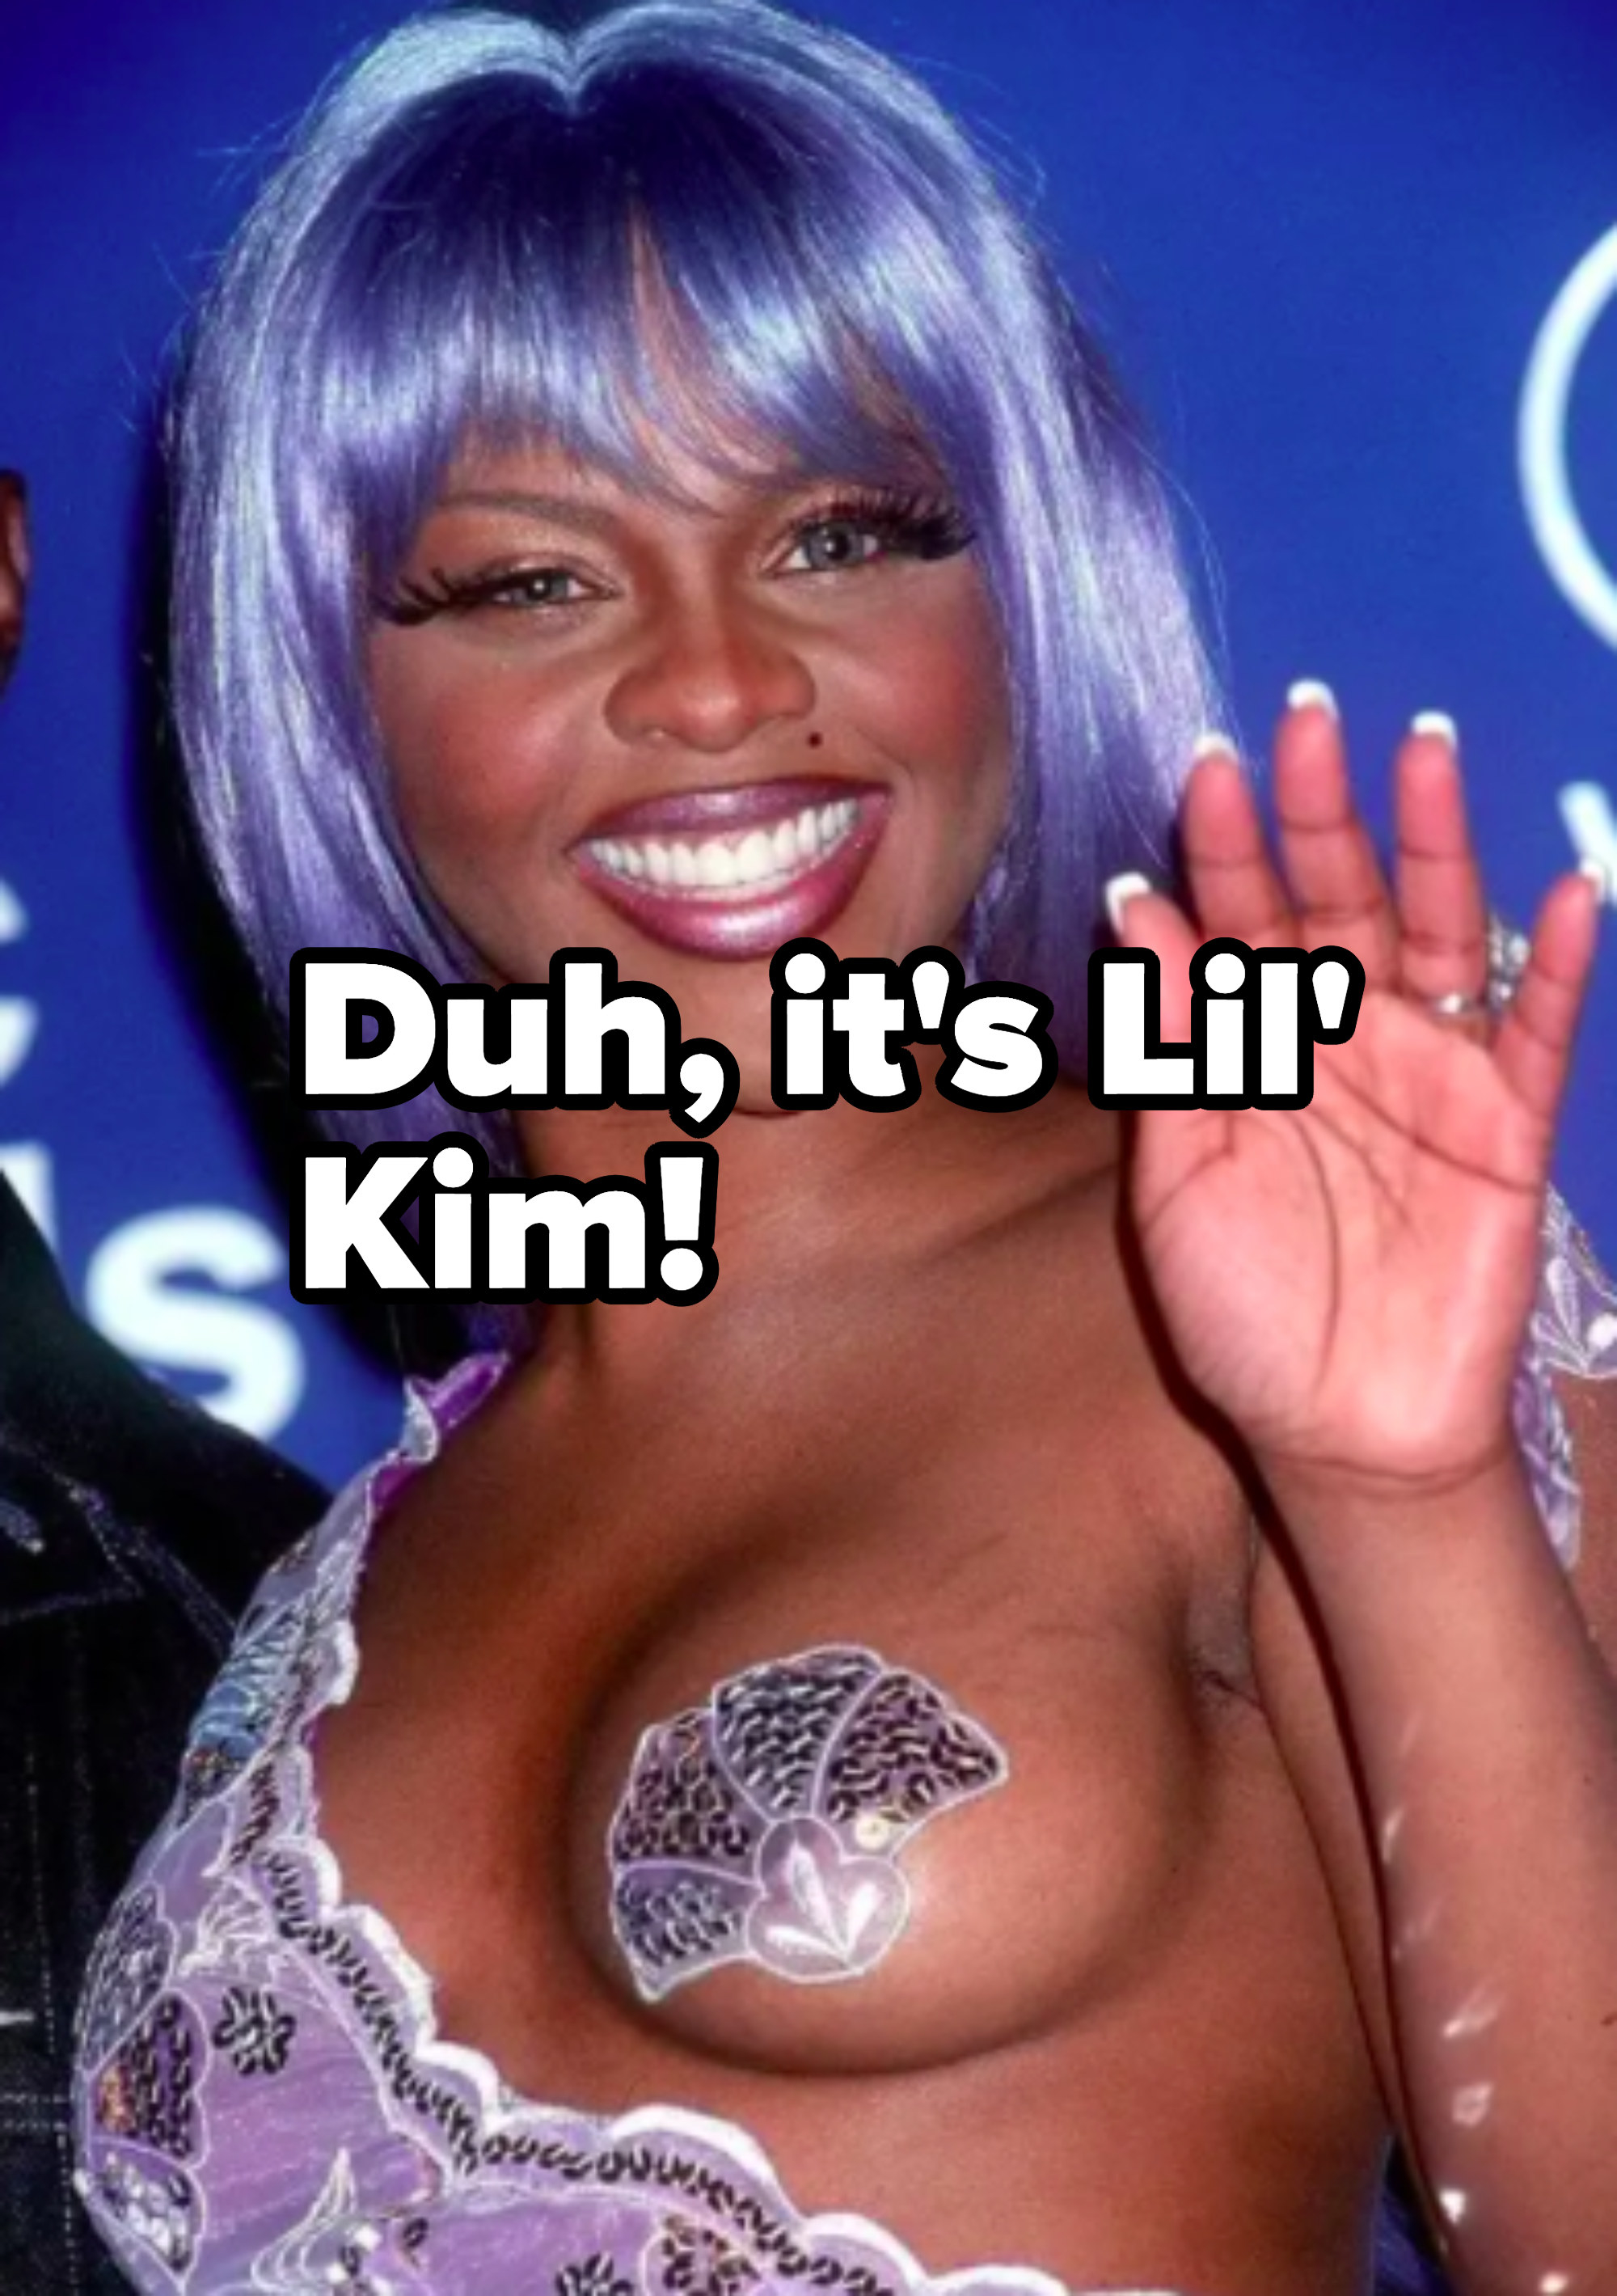 lil&#x27; kim at the vmas with the boob out